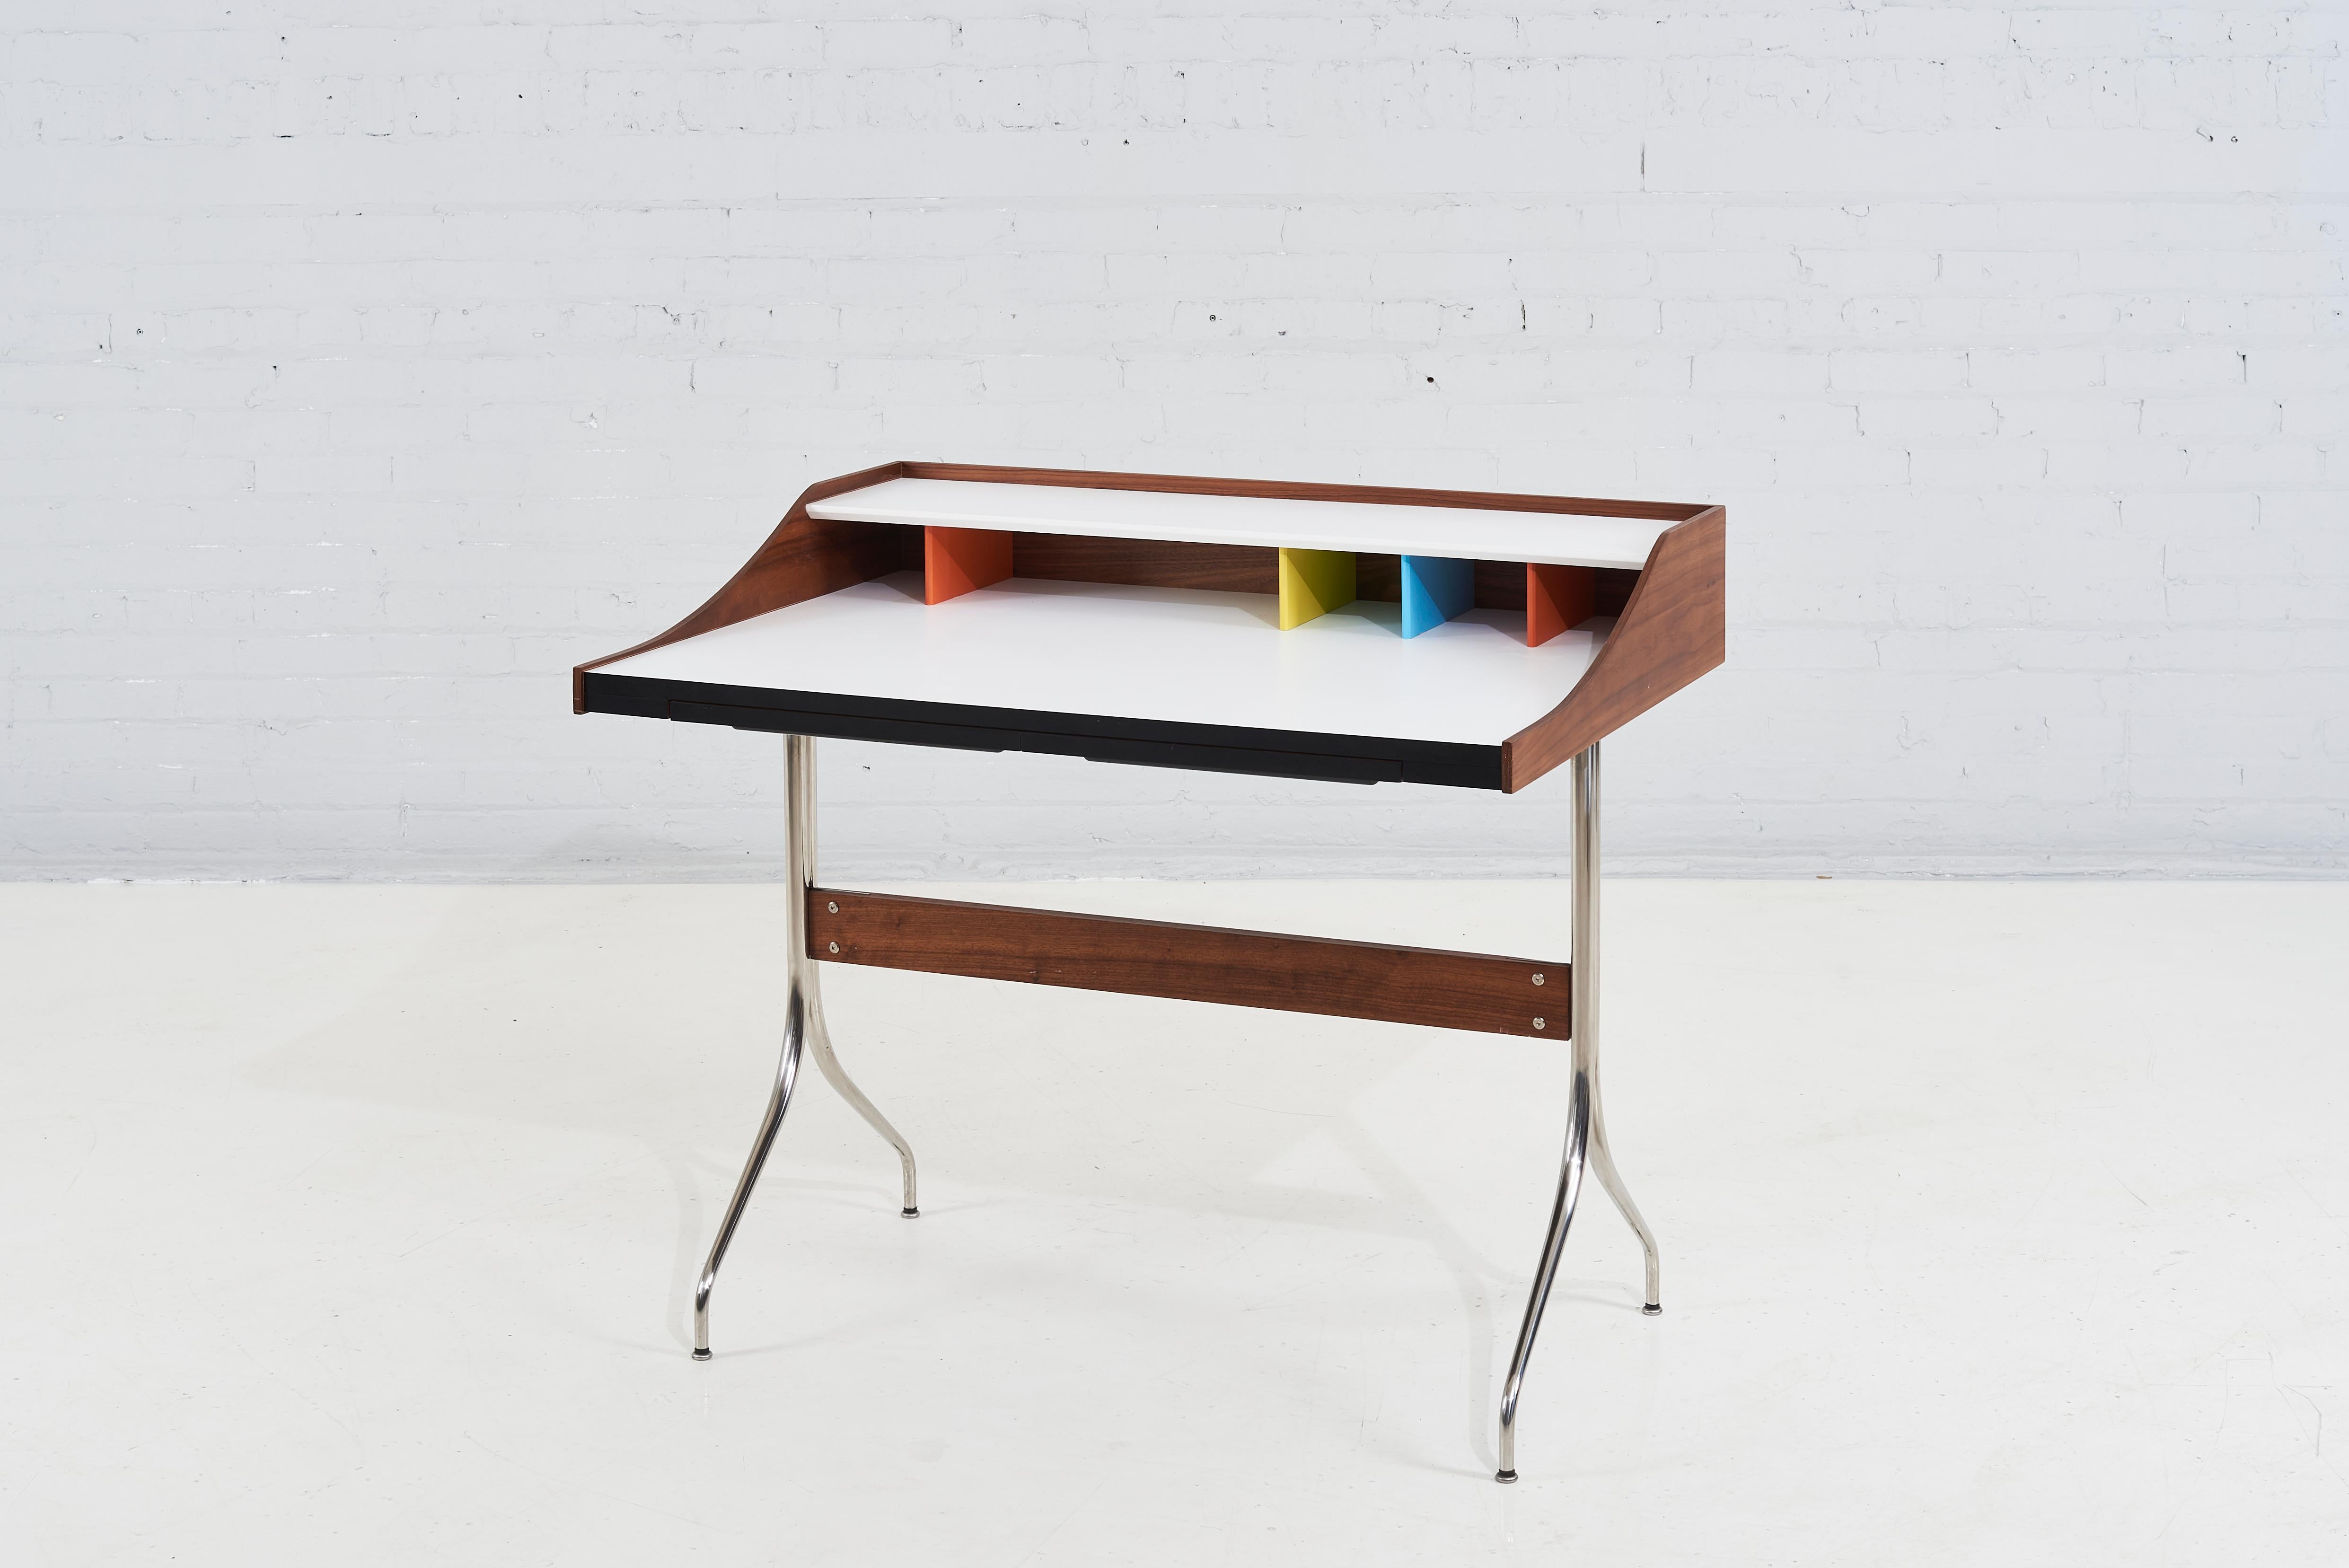 George Nelson swag leg desk. Ample space for writing, typing or sketching, the swag leg desk also offers colorful cubbies for desktop organization and a shelf.